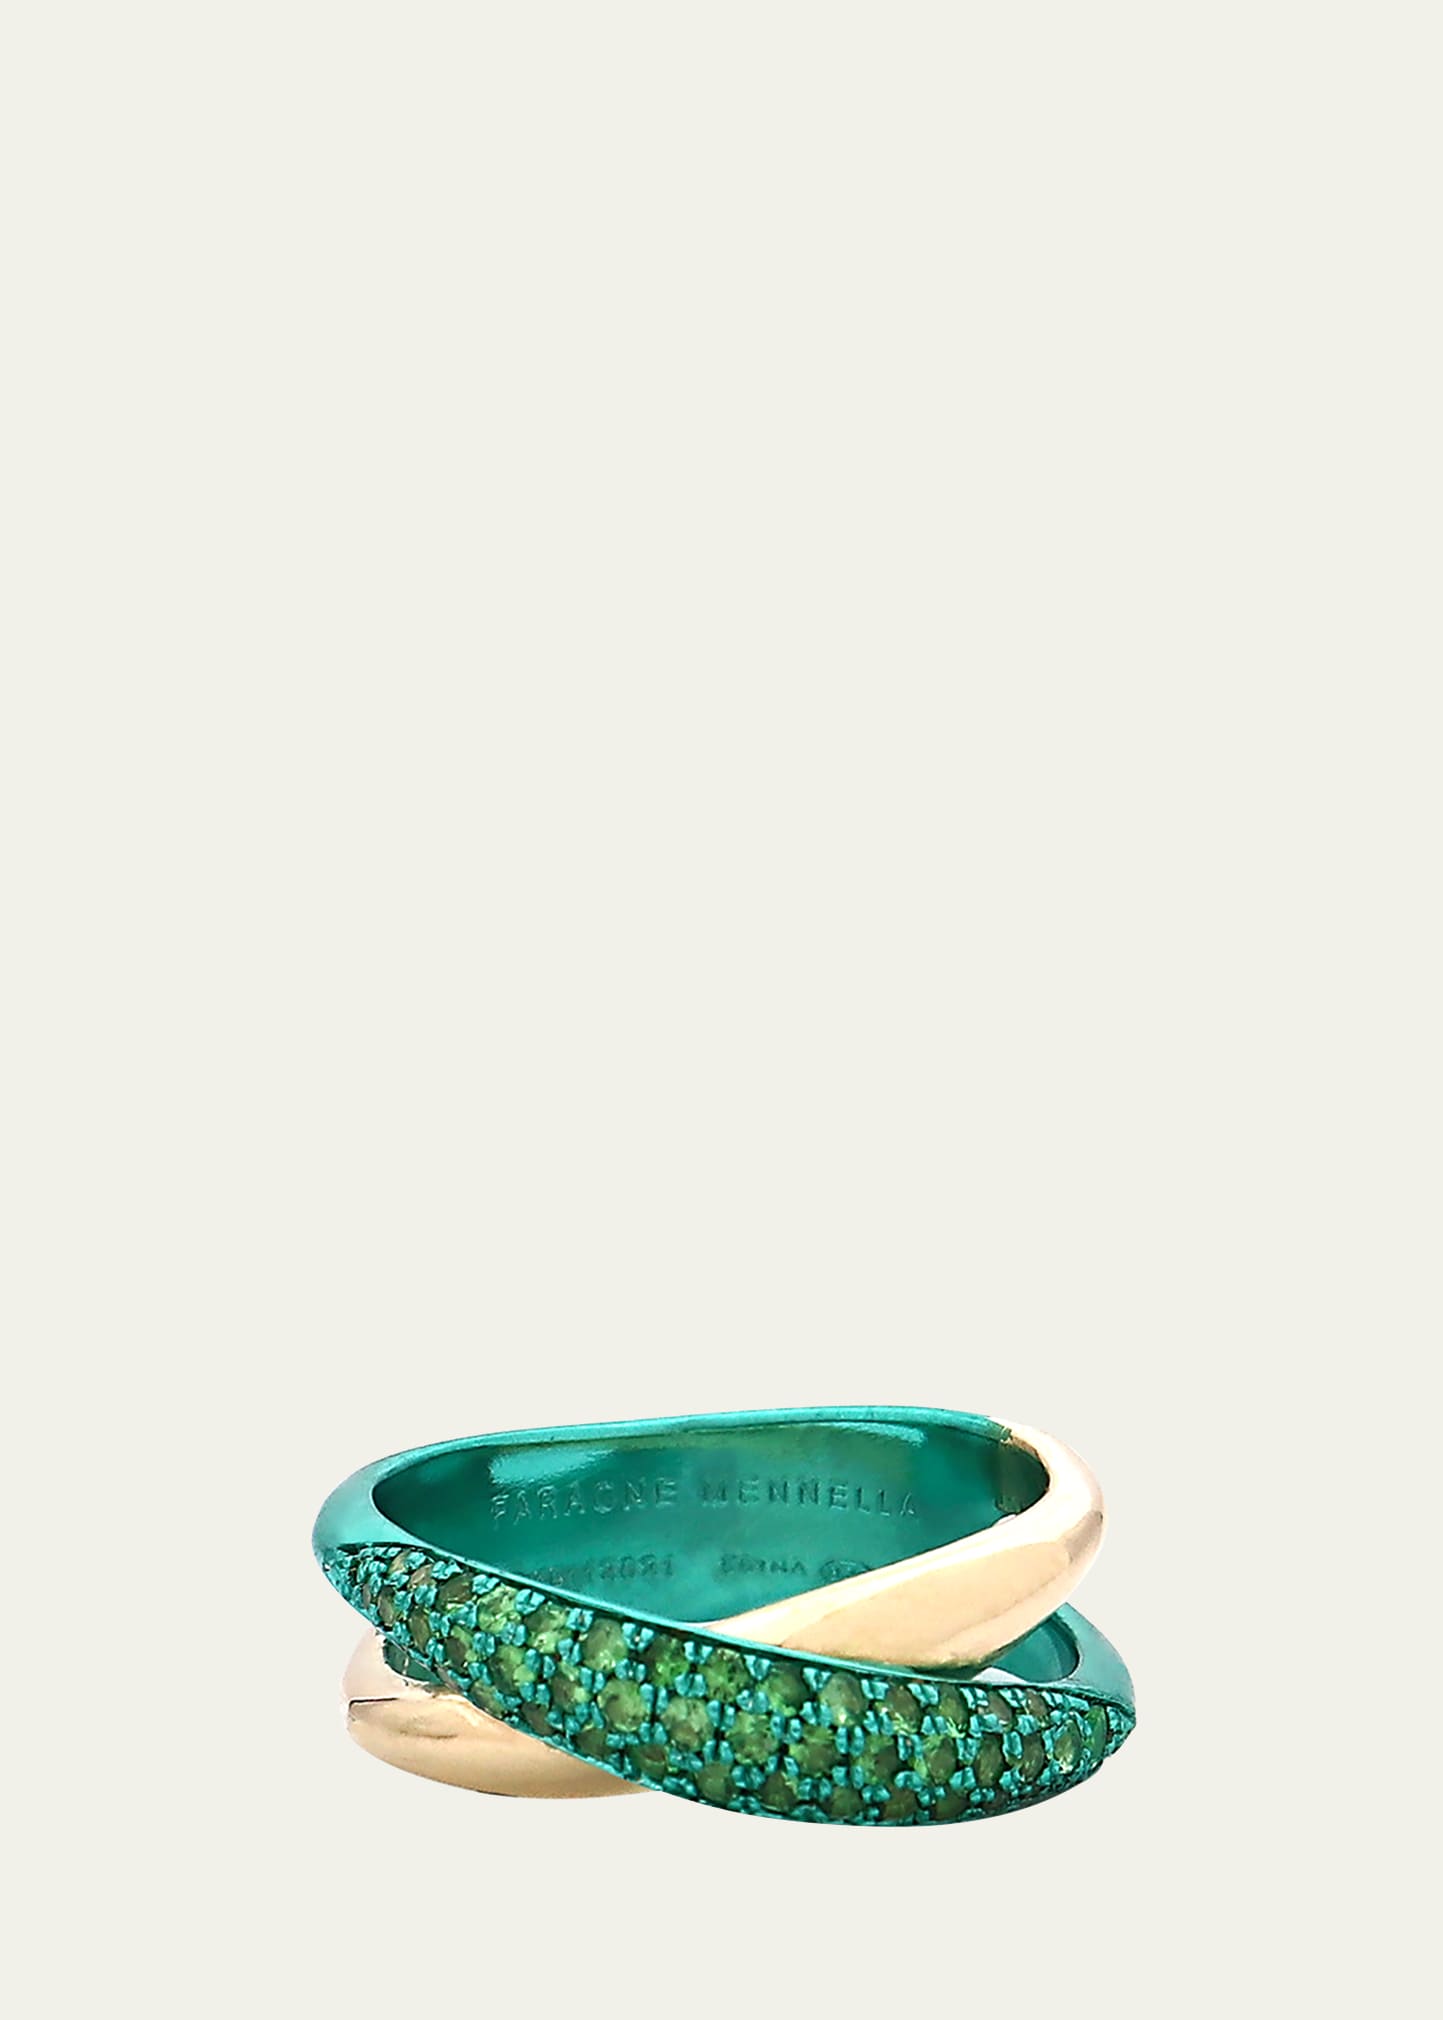 Faraone Mennella Margaux Ring in 18K Gold, Sterling Silver and Tsavorites